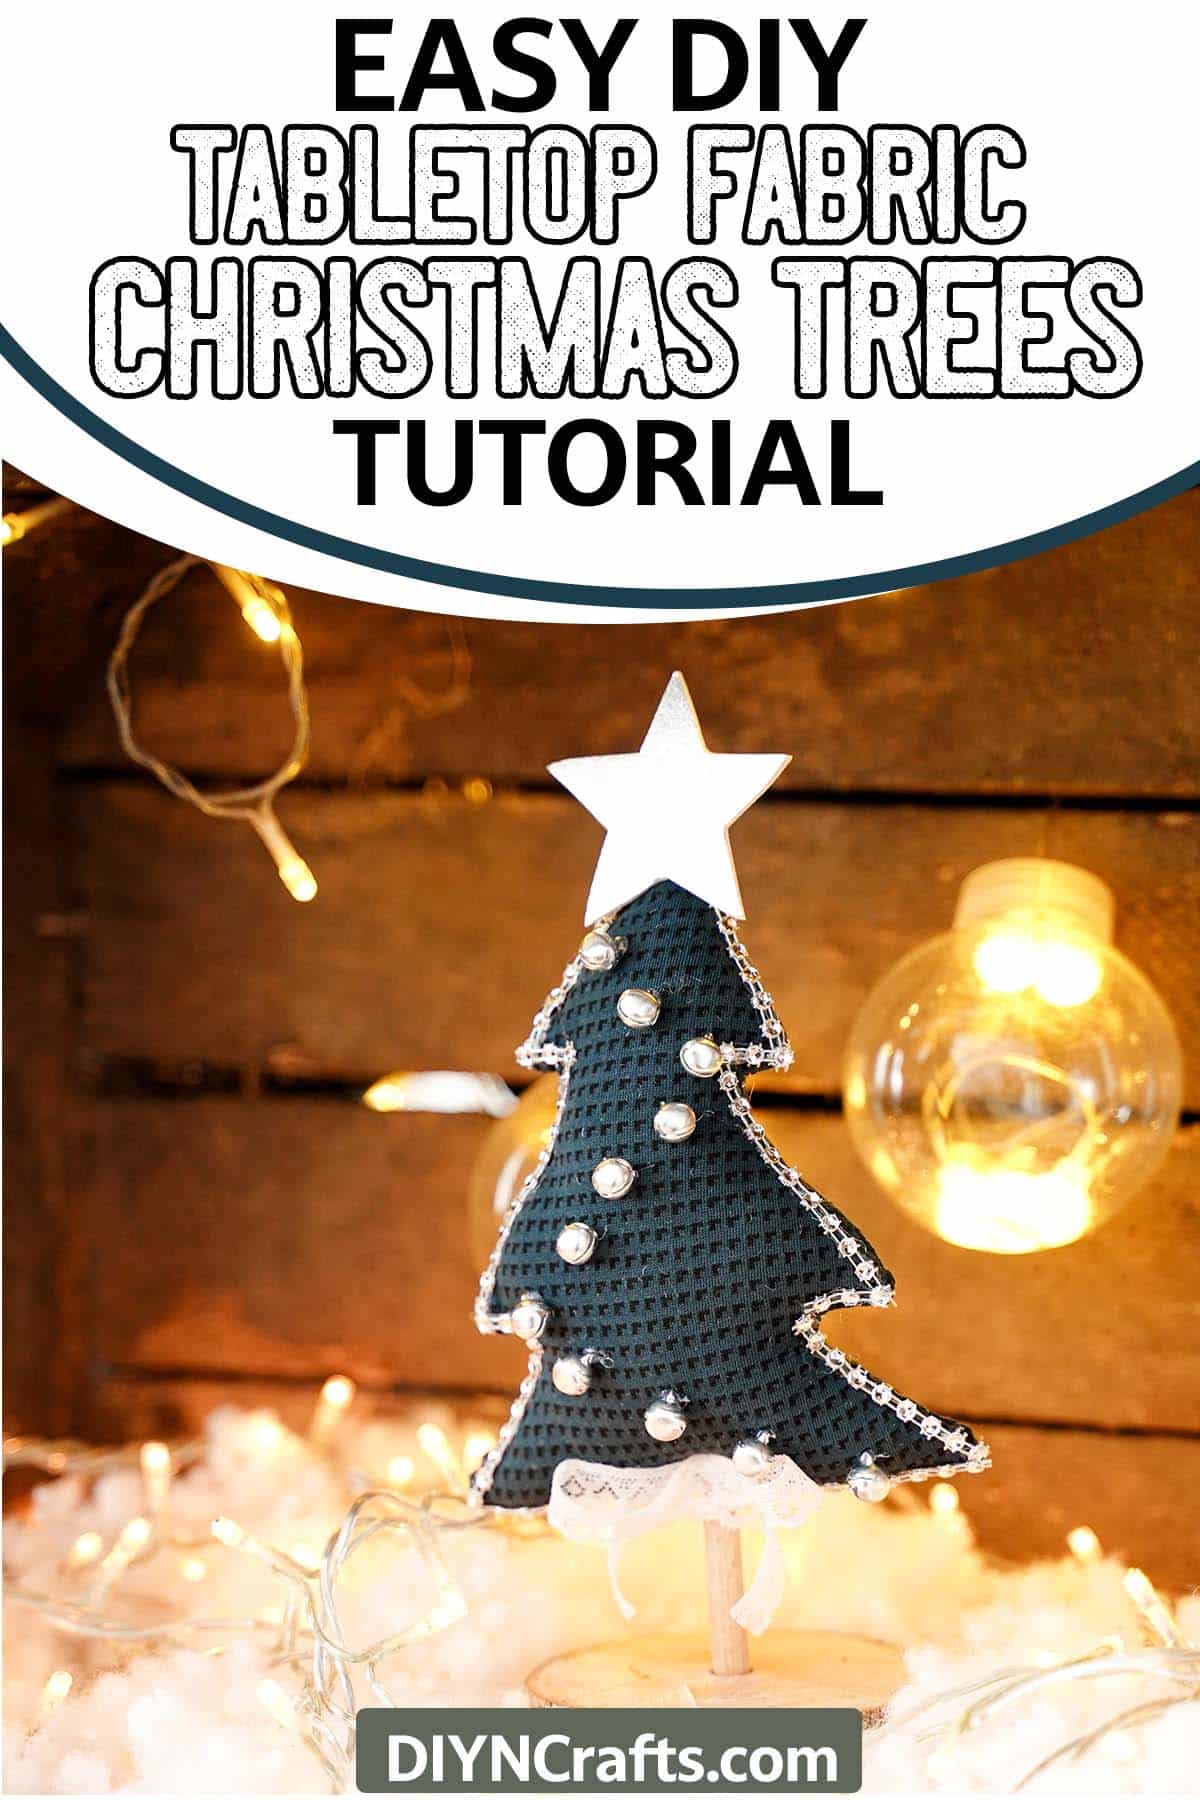 mini christmas trees made of fabric with text which reads easy diy tabletop fabric christmas trees tutorial